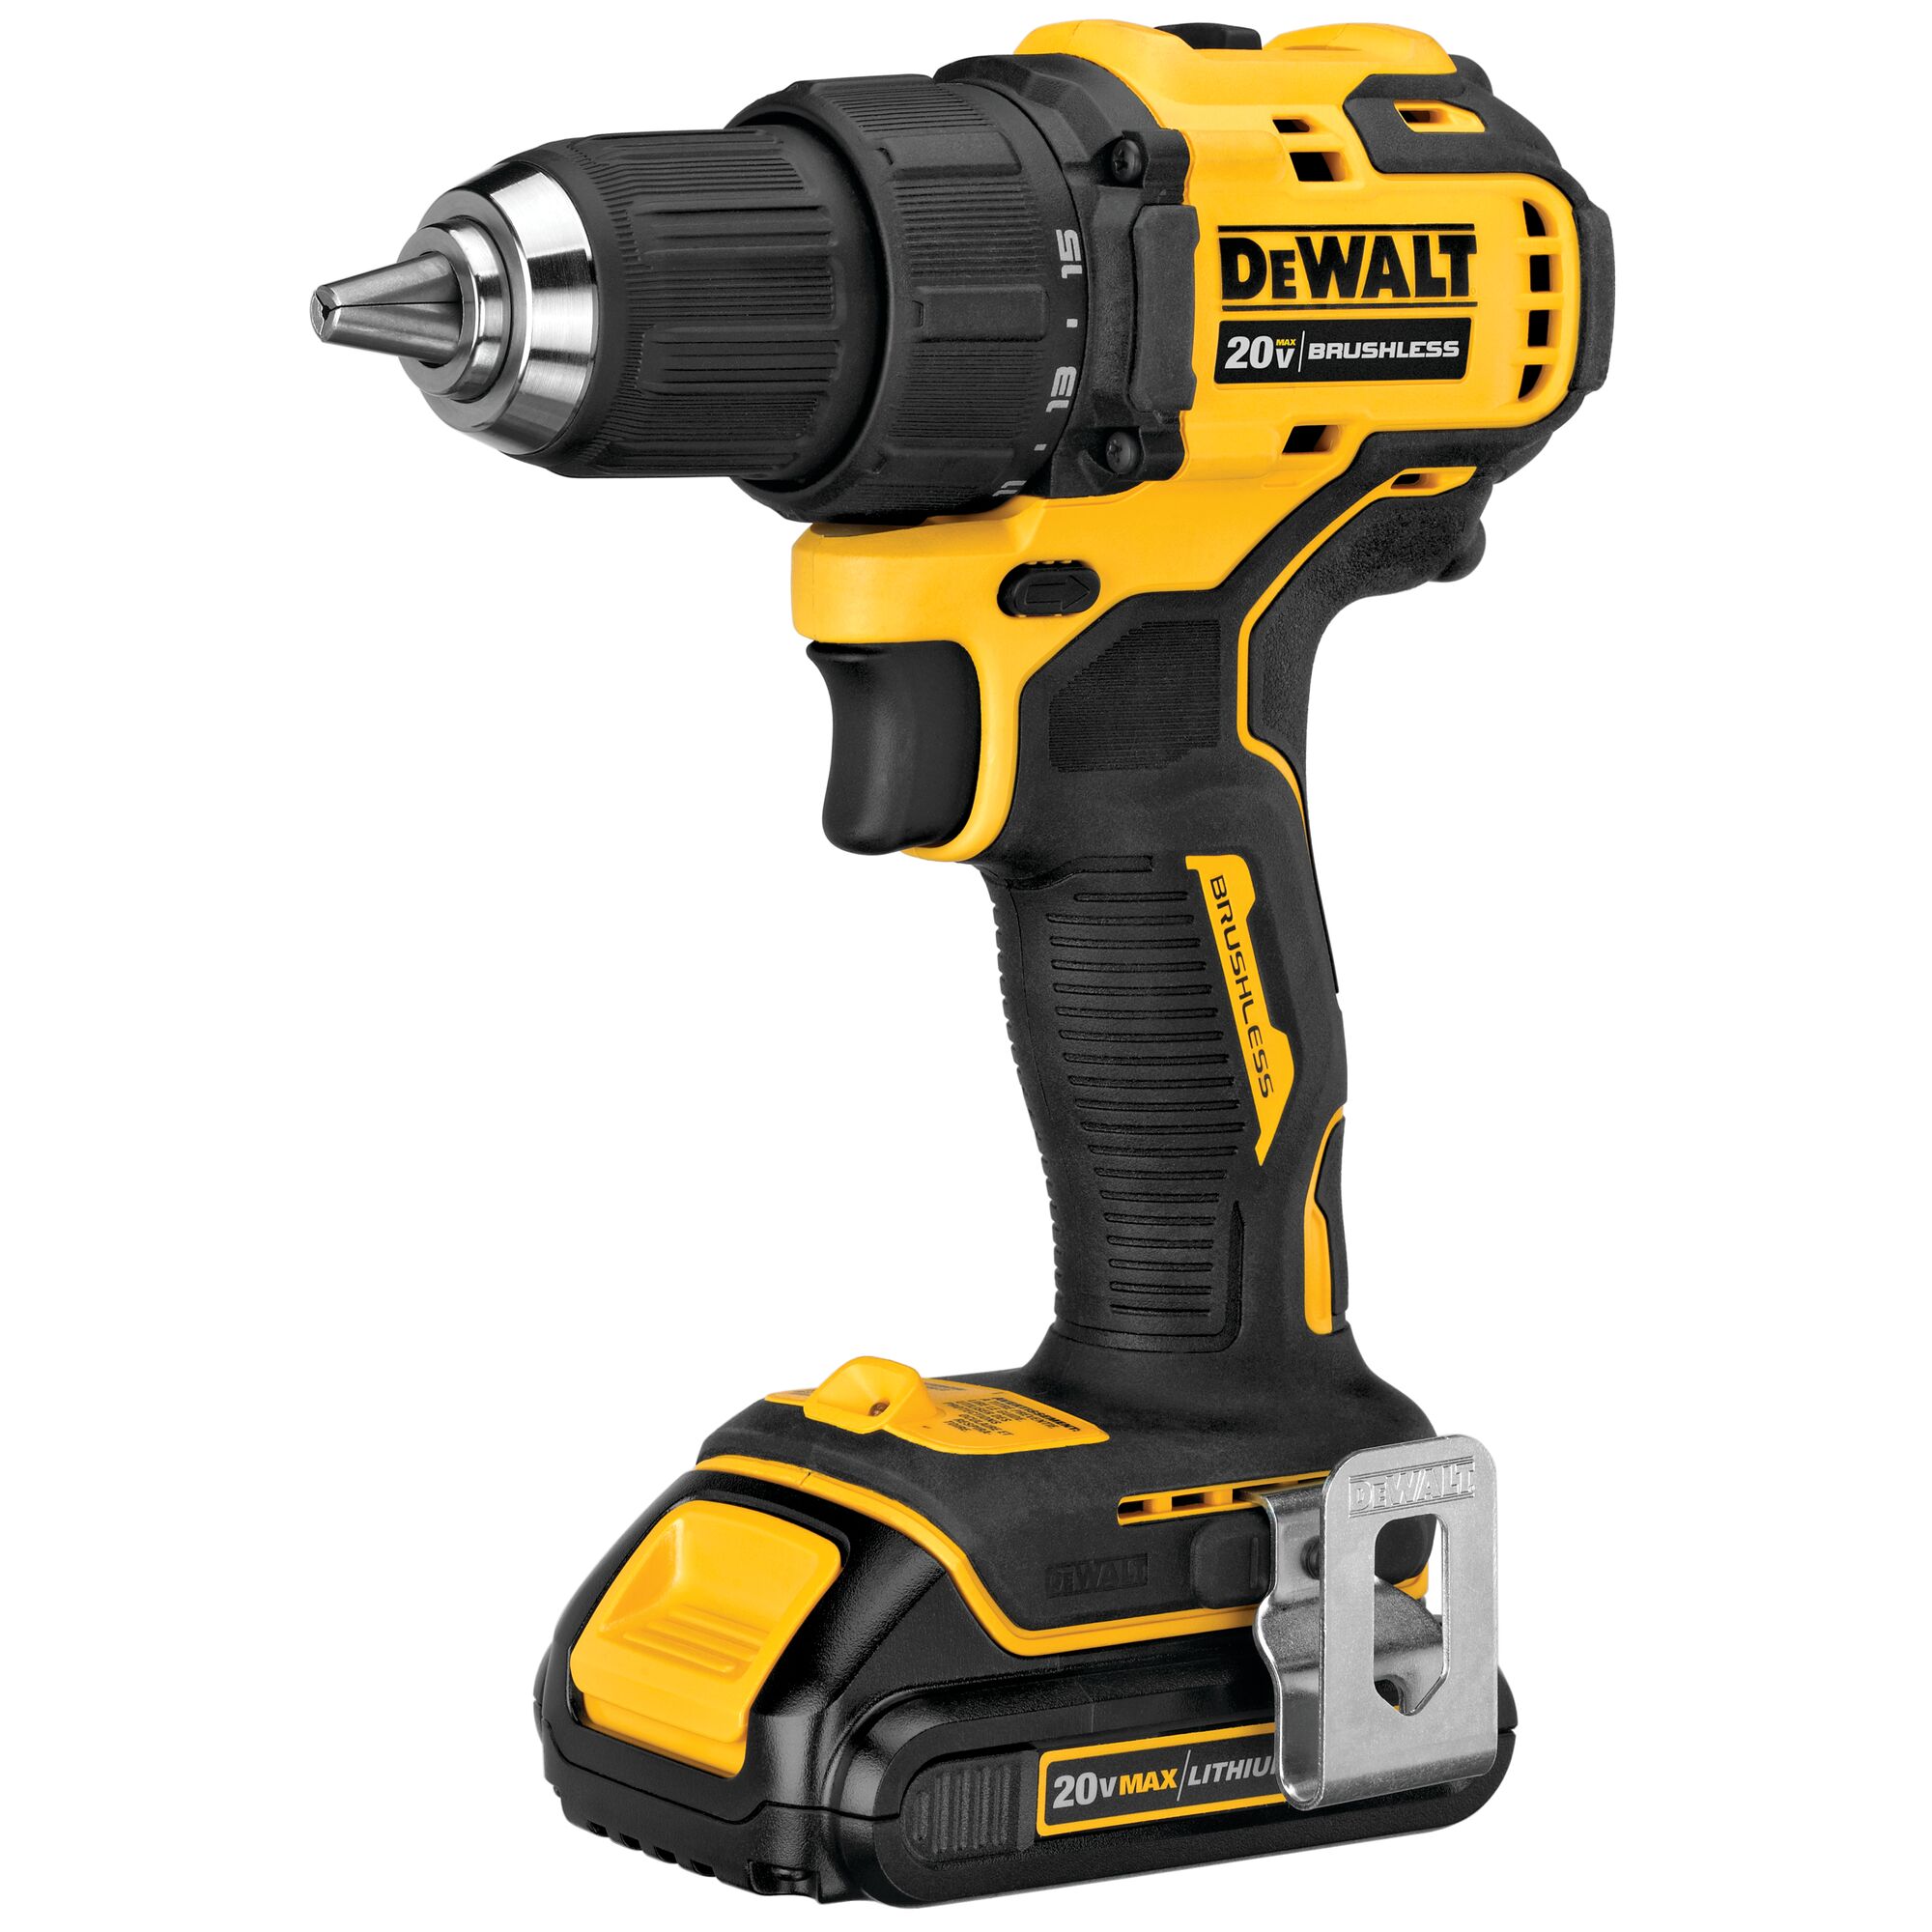 Yellow/Black for sale online DEWALT DCD708C2 Atomic Brushless Compact Drill/Driver Kit 